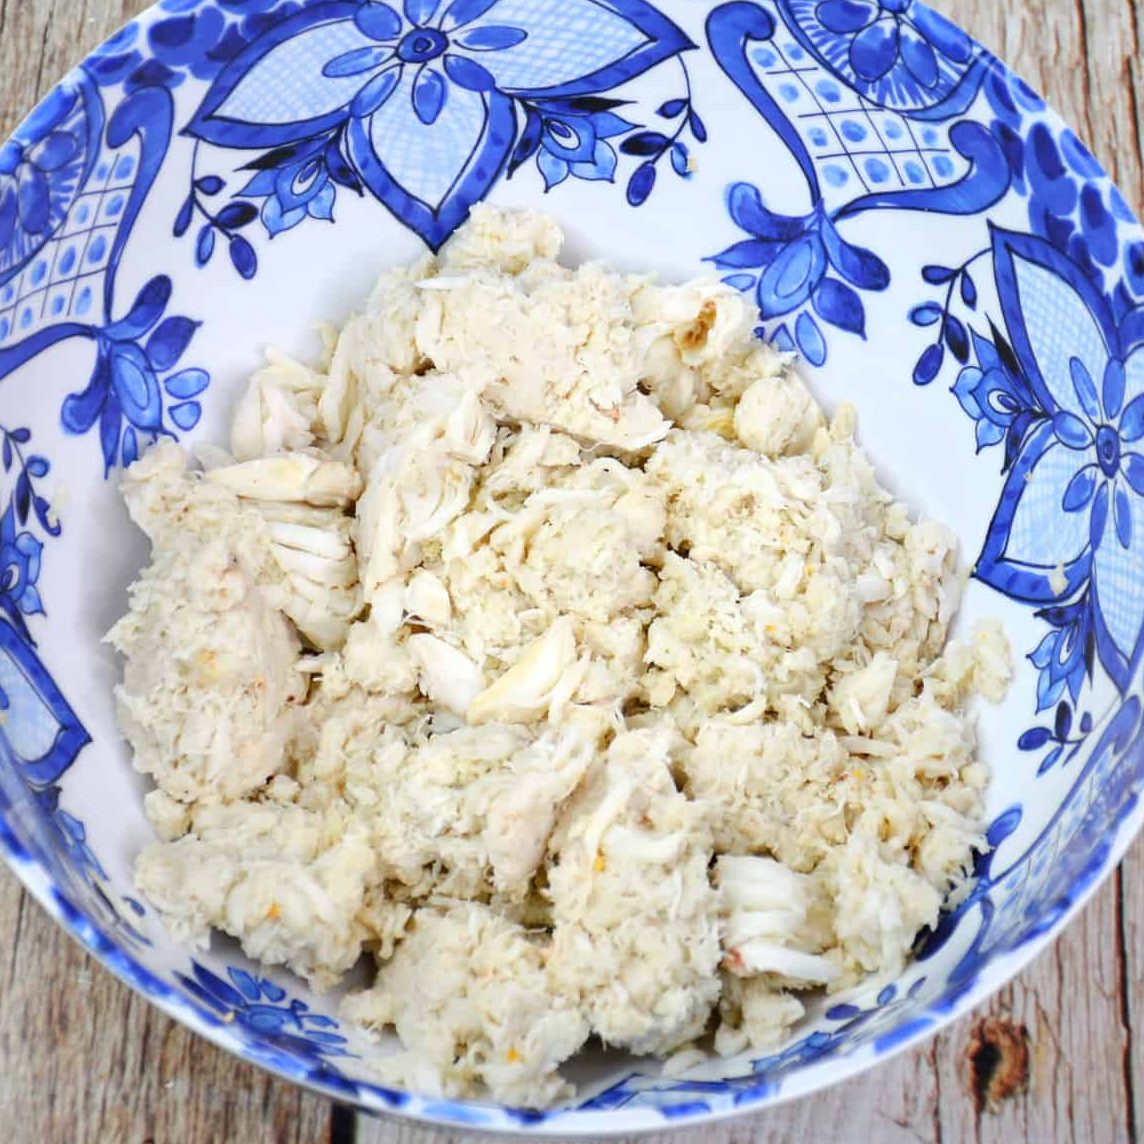 Mix the crab meat with the cream cheese mixture.